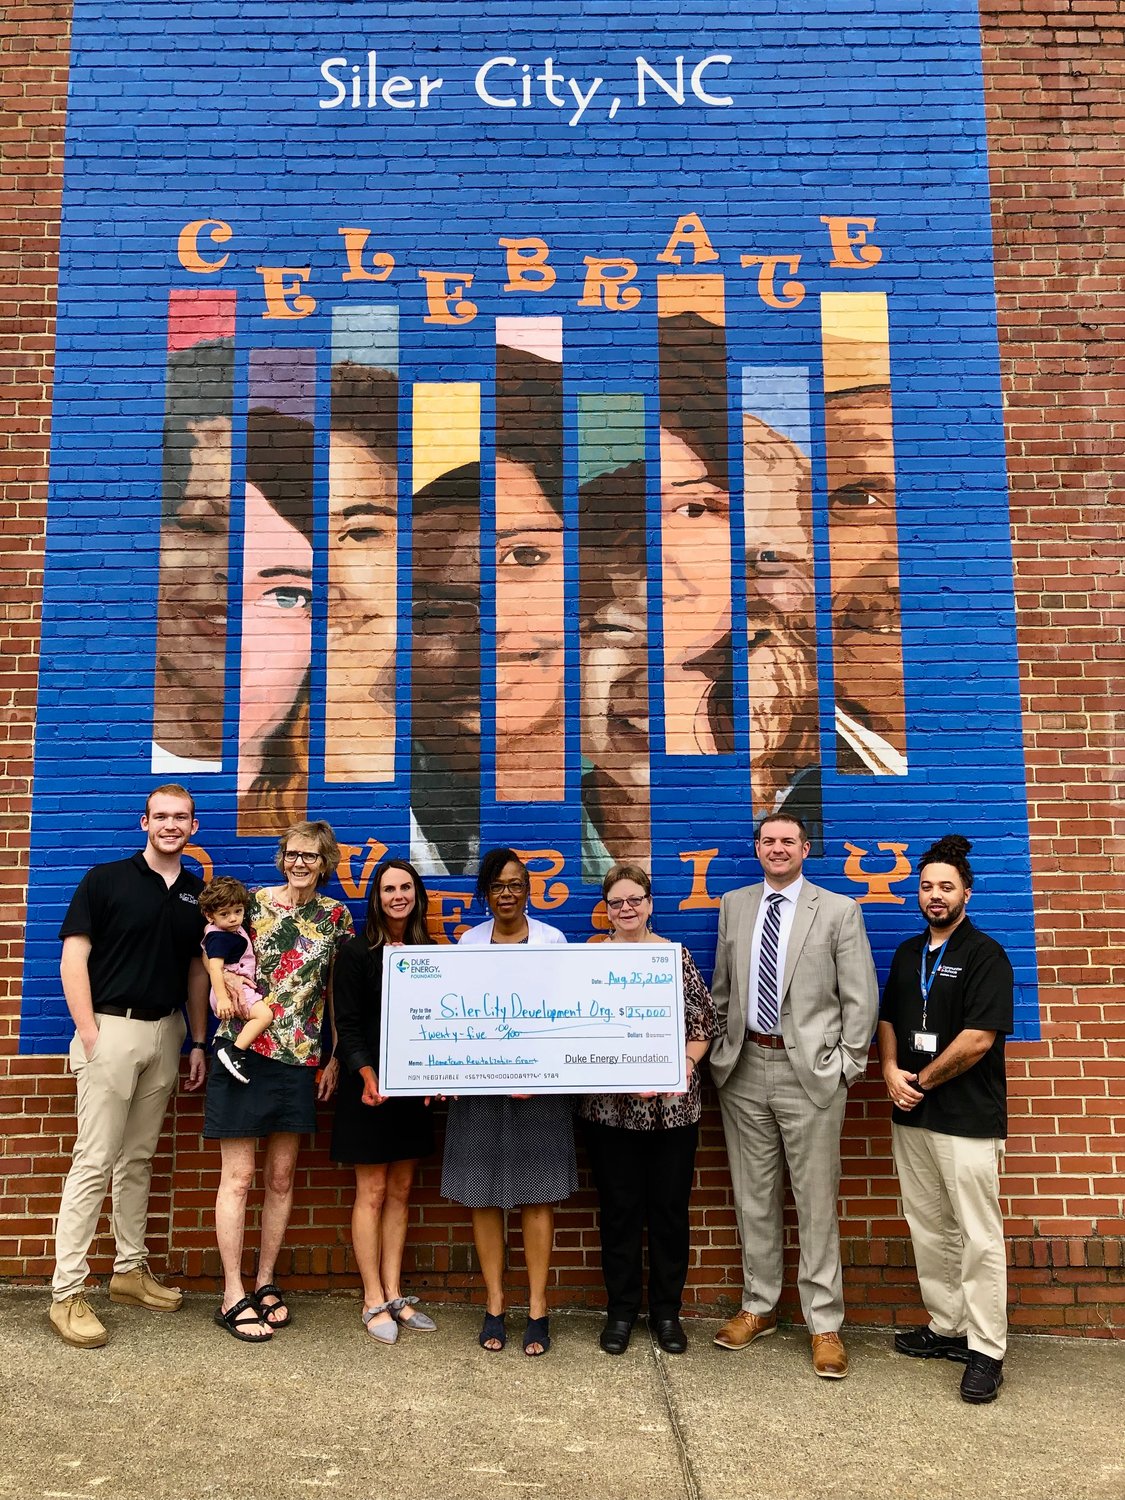 Officials from the Siler City Development Organization receive a $25,000 Duke Energy Hometown Revitalization grant to help improve building facades and interior rehabilitation downtown.